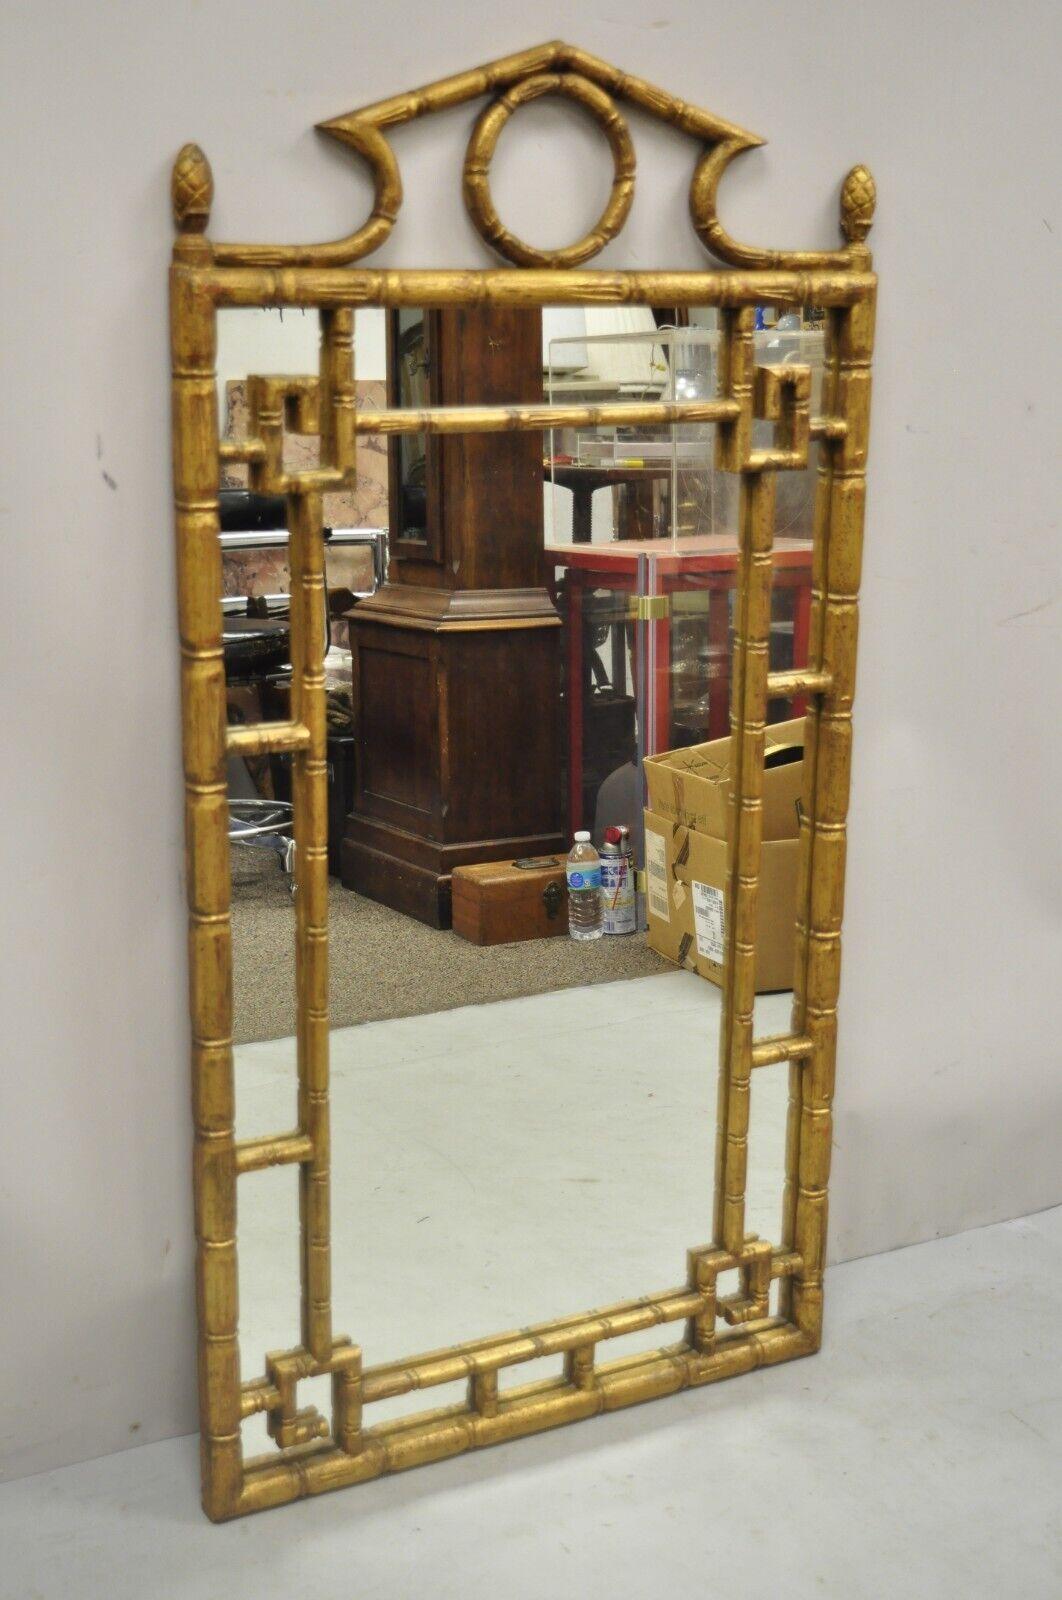 Vintage Italian Hollywood Regency gold giltwood faux bamboo pagoda wall mirror. Item features carved wood faux bamboo frame, original label, very nice vintage item, quality Italian craftsmanship, great style and form. Circa mid 20th century.